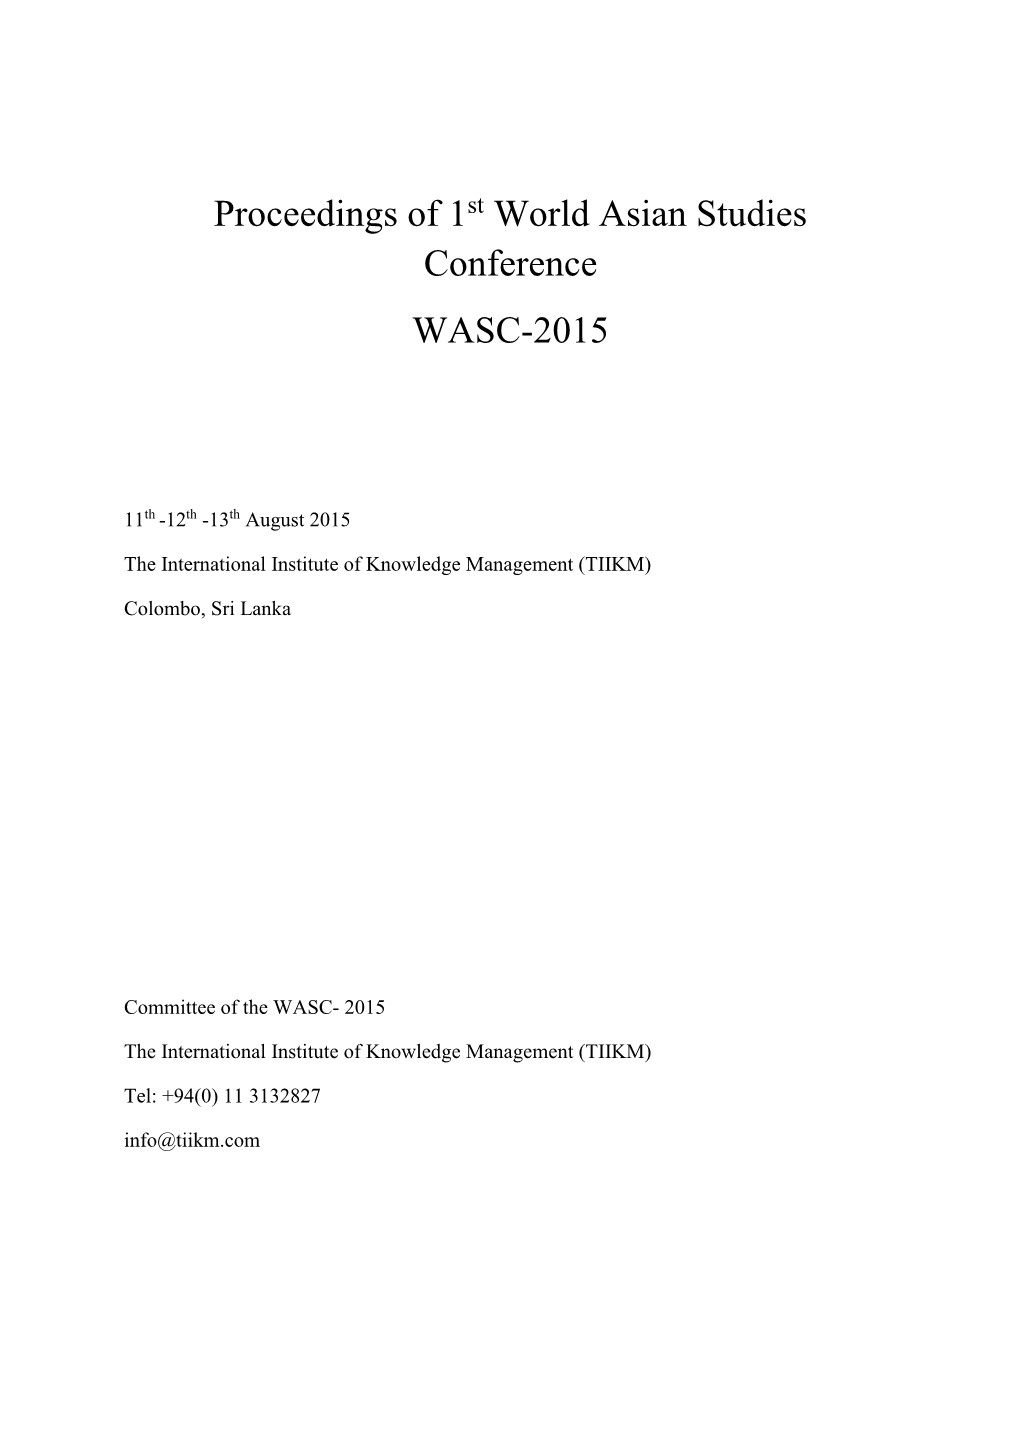 Proceedings of 1St World Asian Studies Conference WASC-2015